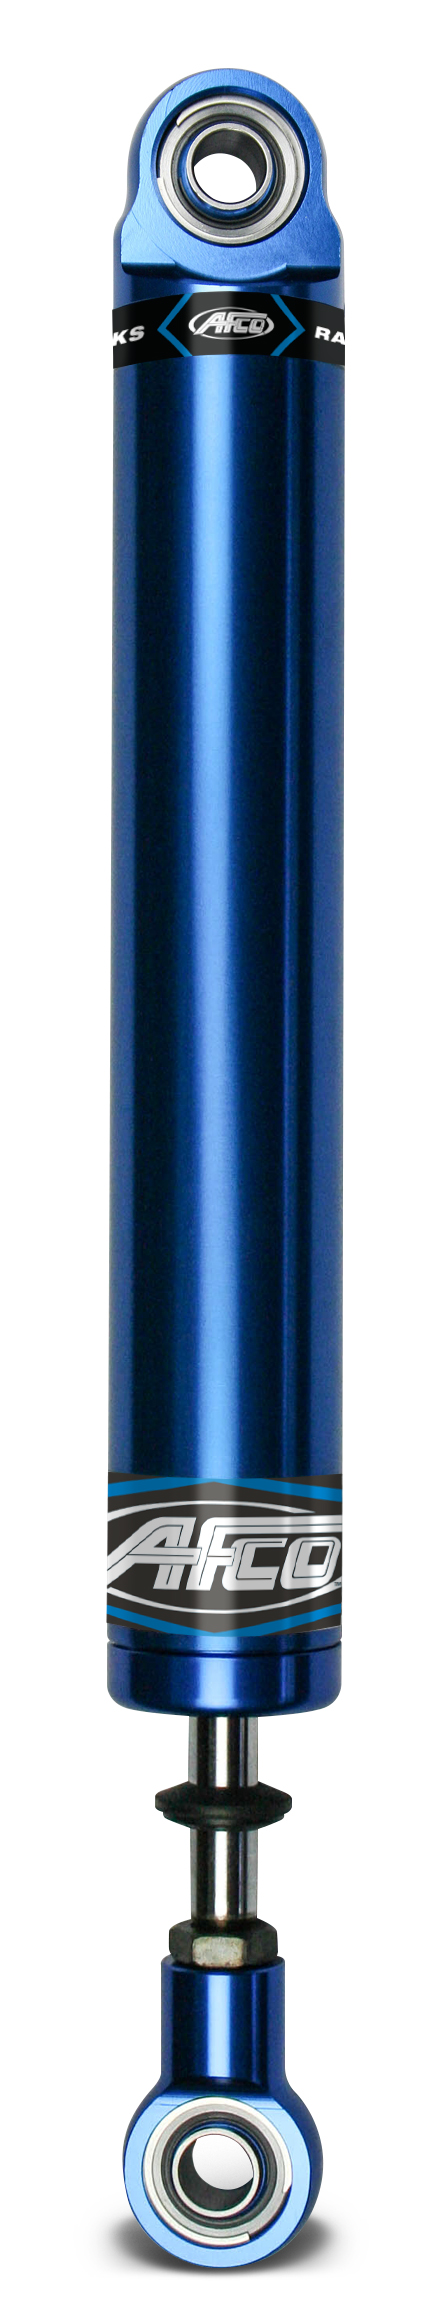 Aluminum Shock Twin Tube 16 Series Small Body 6 Inch Comp 2/Reb 1 Smooth